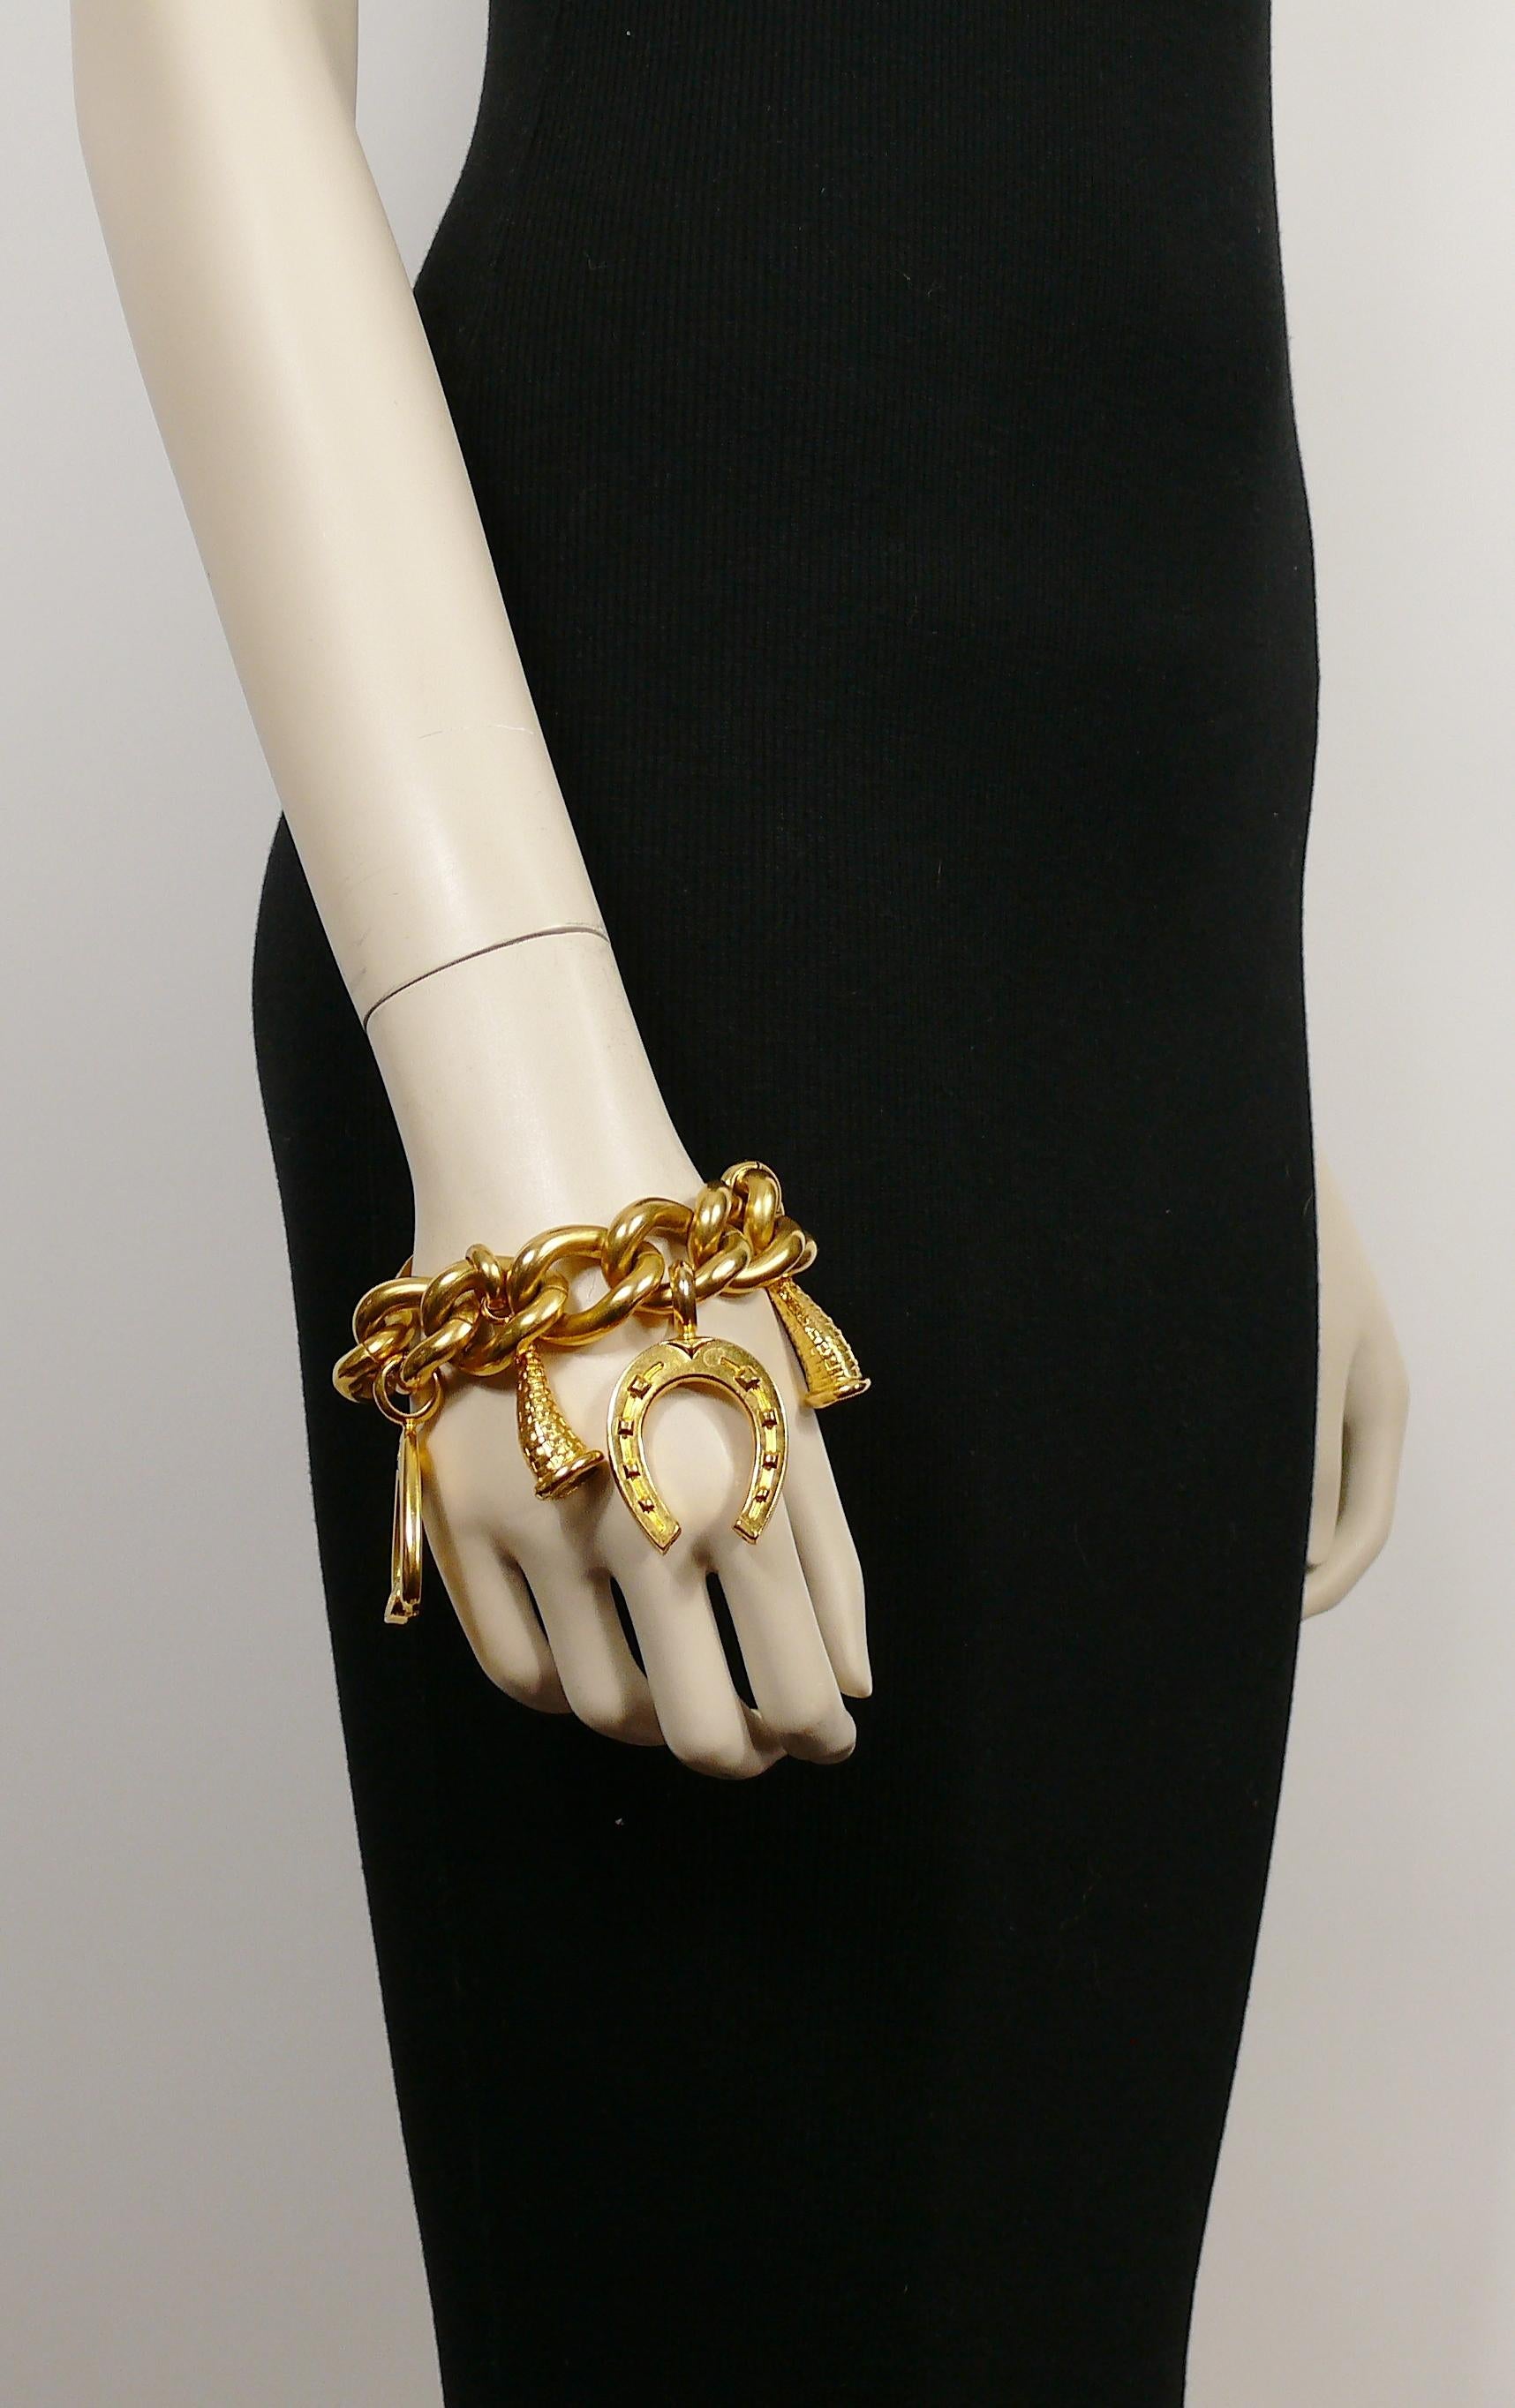 CELINE PARIS vintage chunky gold toned bracelet featuring equestrian theme charms (stirrups and horseshoe) and cornucopias.

From the 1990 collection.

Toggle clasp with T-bar.

Embossed CELINE PARIS MADE IN ITALY 90.

Indicative measurements :